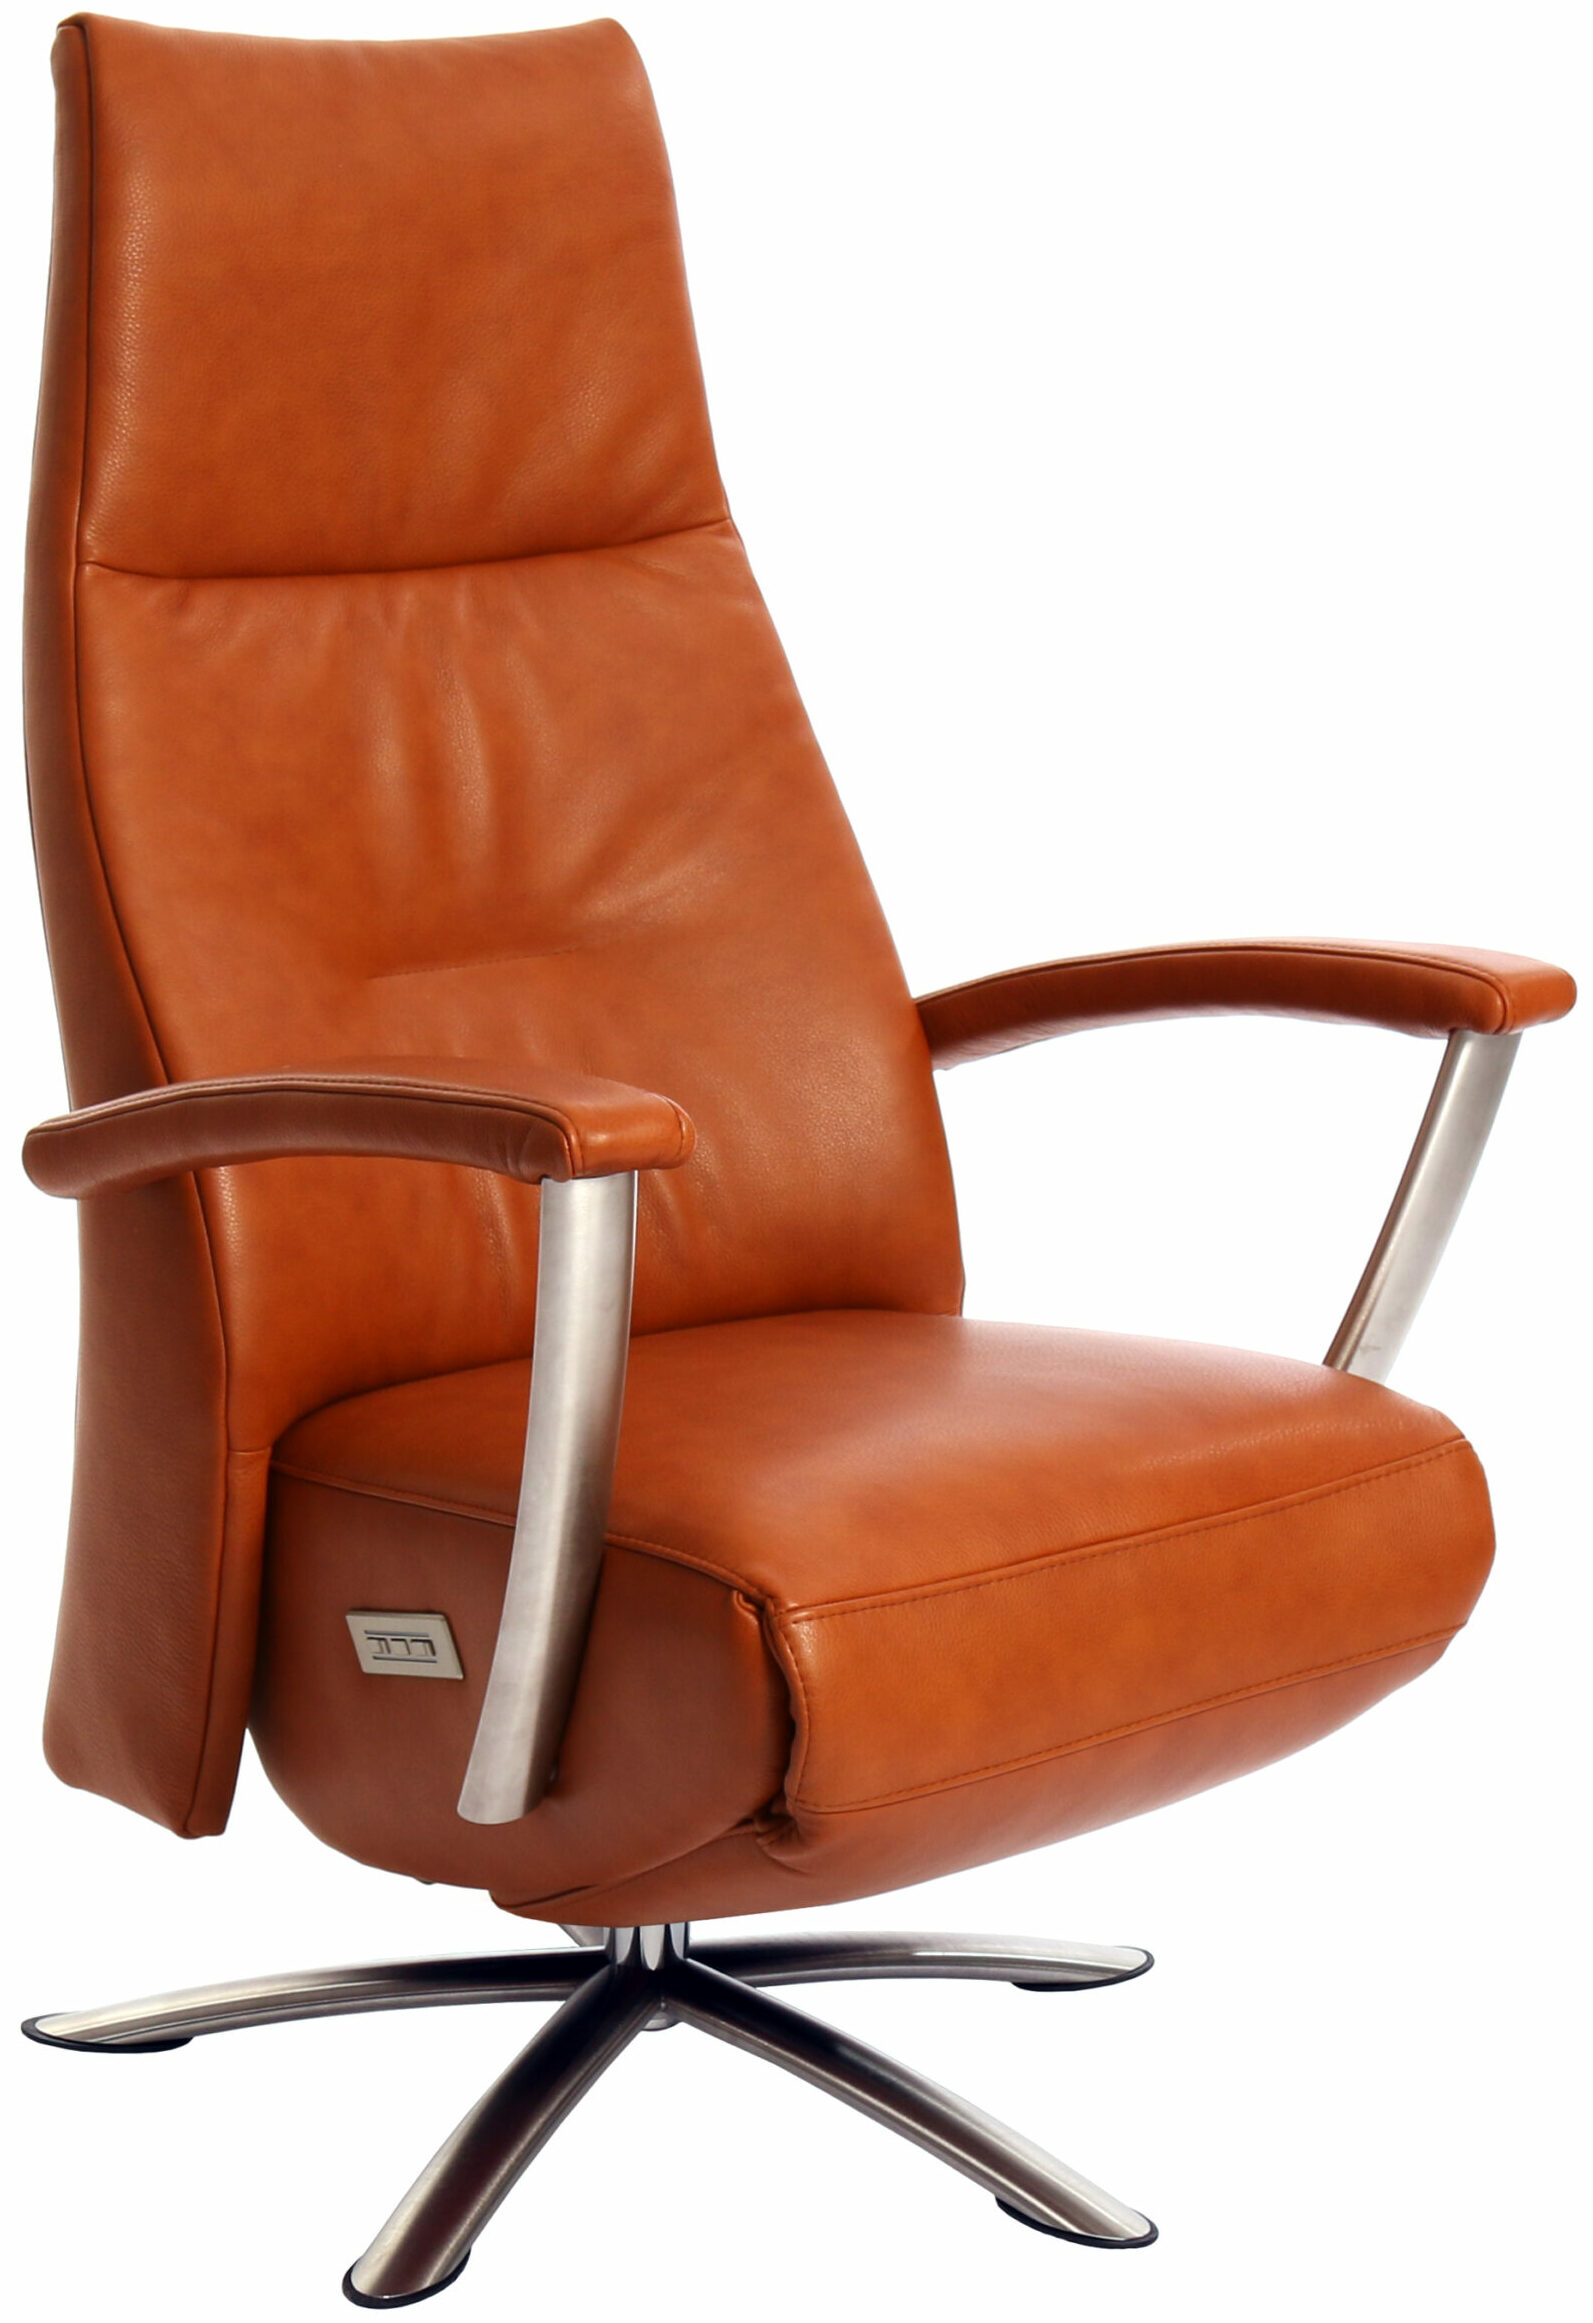 Twinz 624 relaxfauteuil